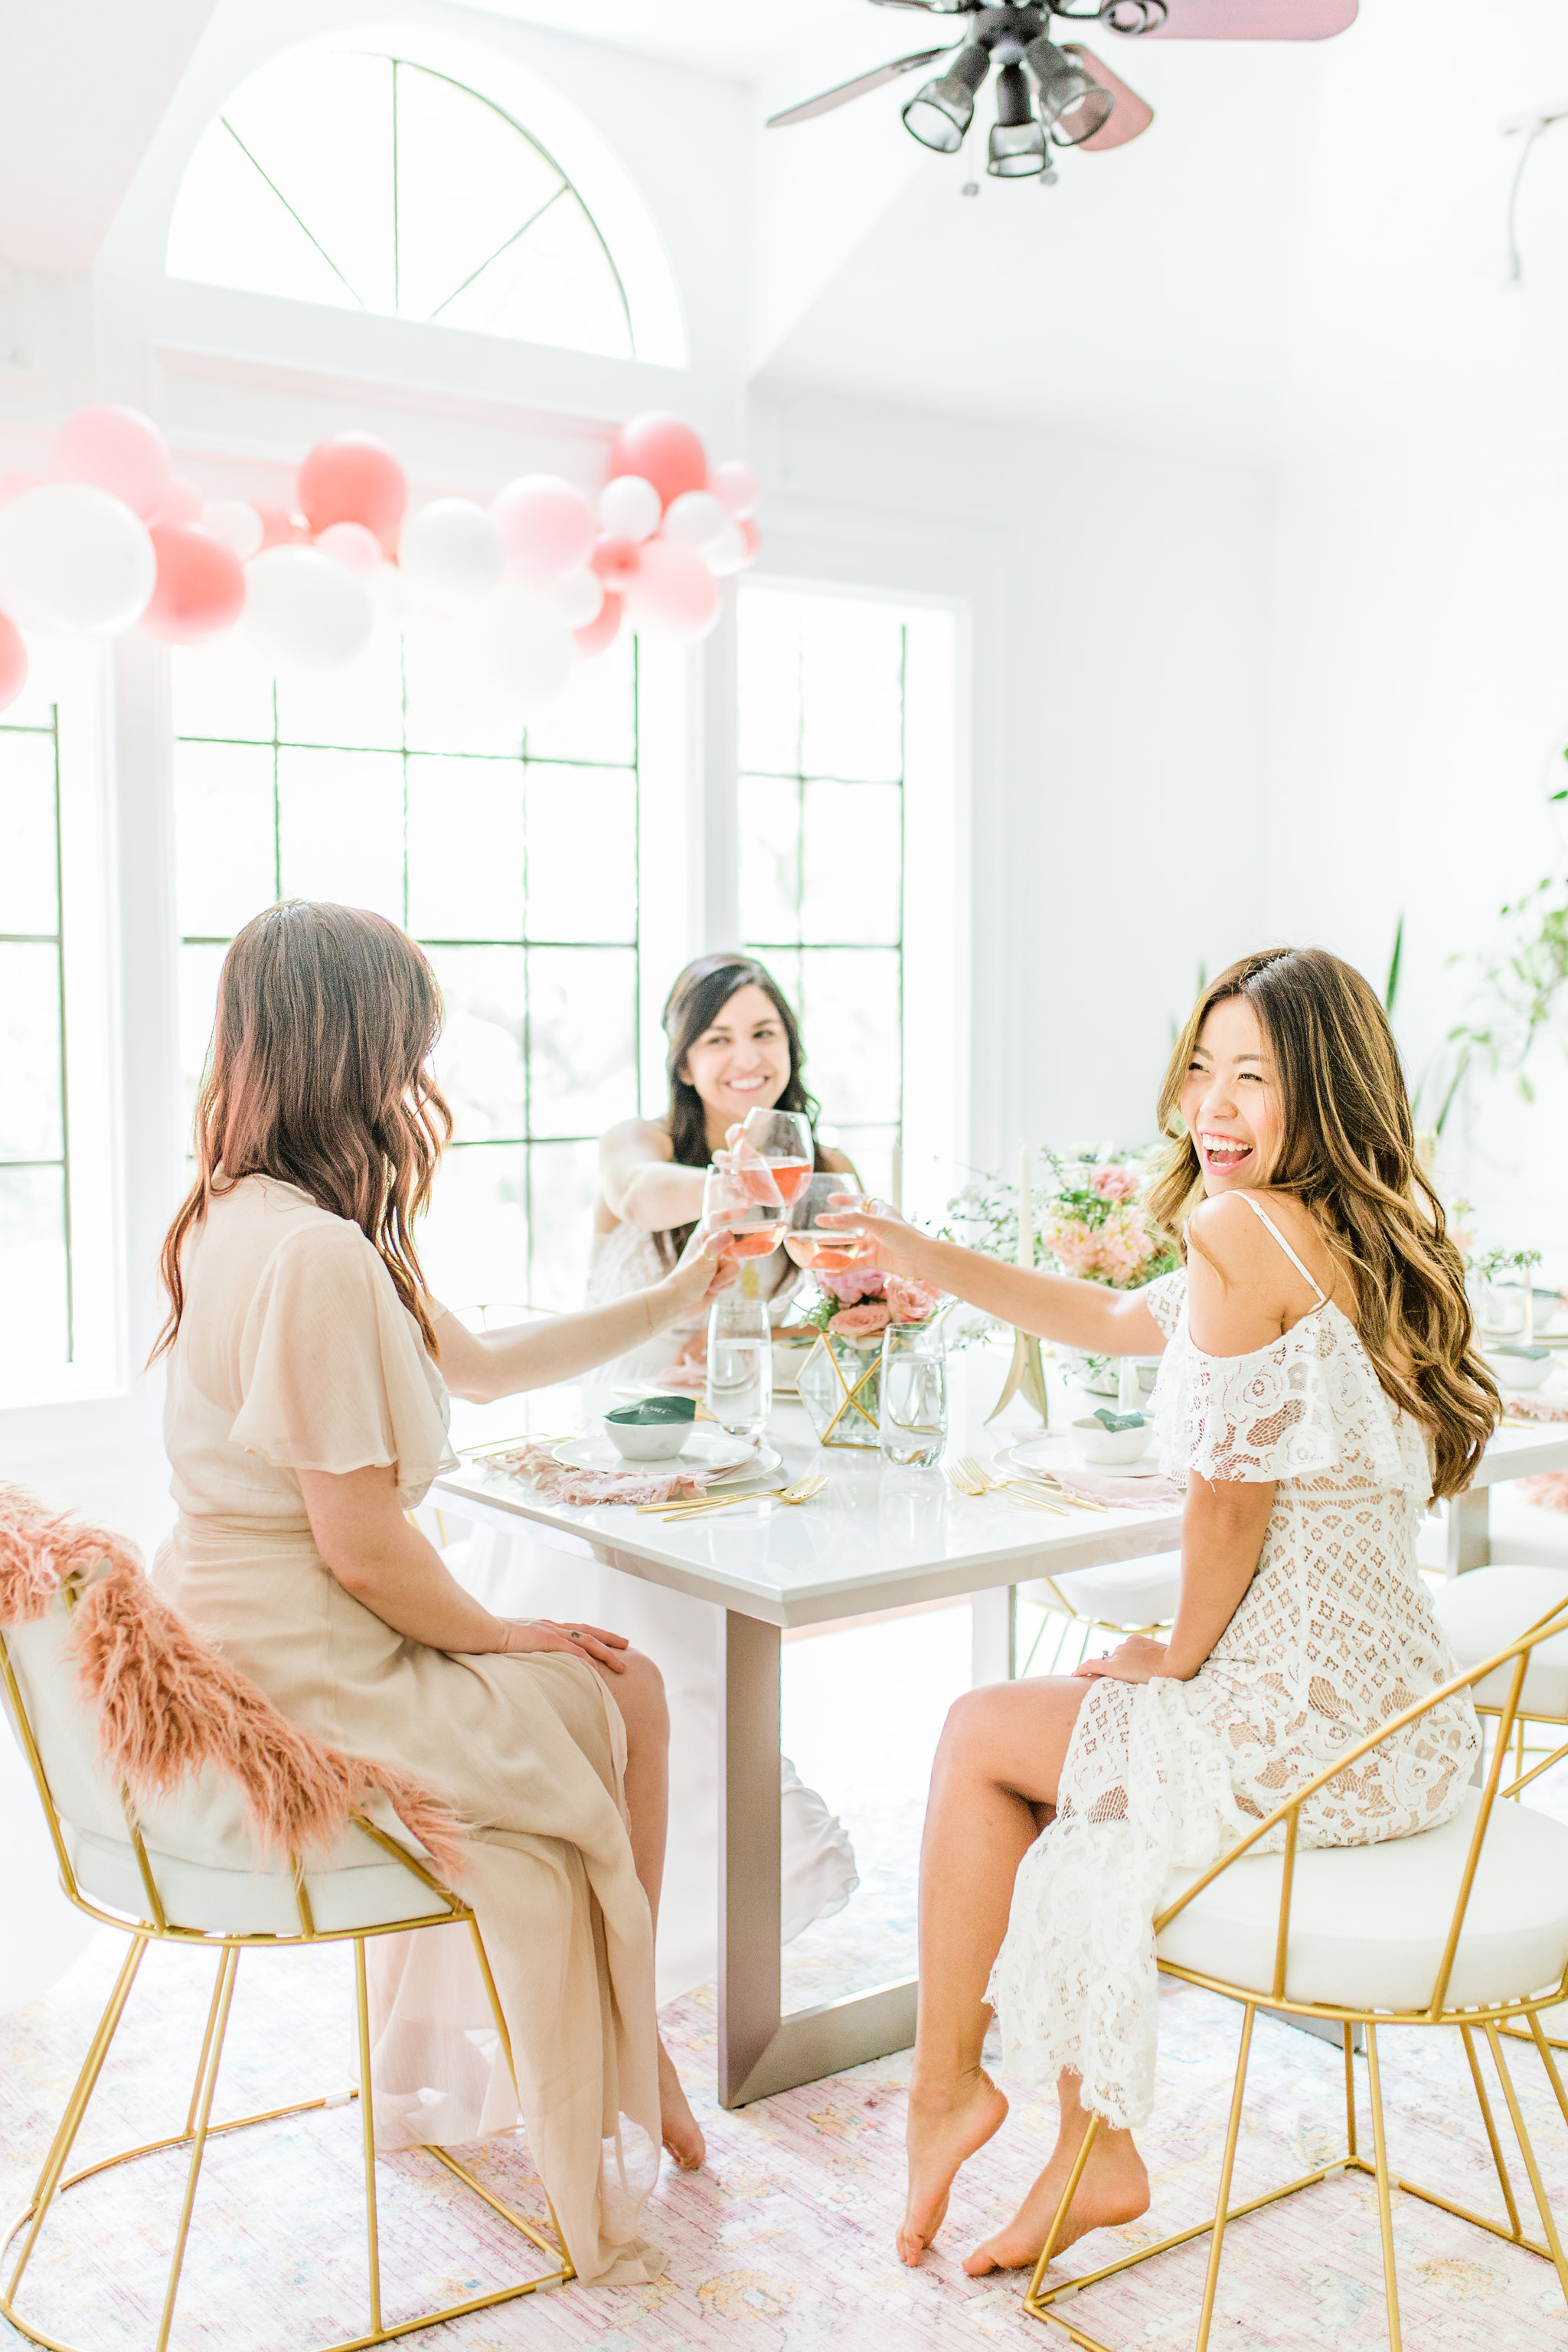 Olivia and Oliver Gold, Blush and Greenry Plants Gilded Garden Styled Bridal Shower Brunch with Bed Bath Beyond bridal shower ideas with pink ballons Joyfullygreen.jpg